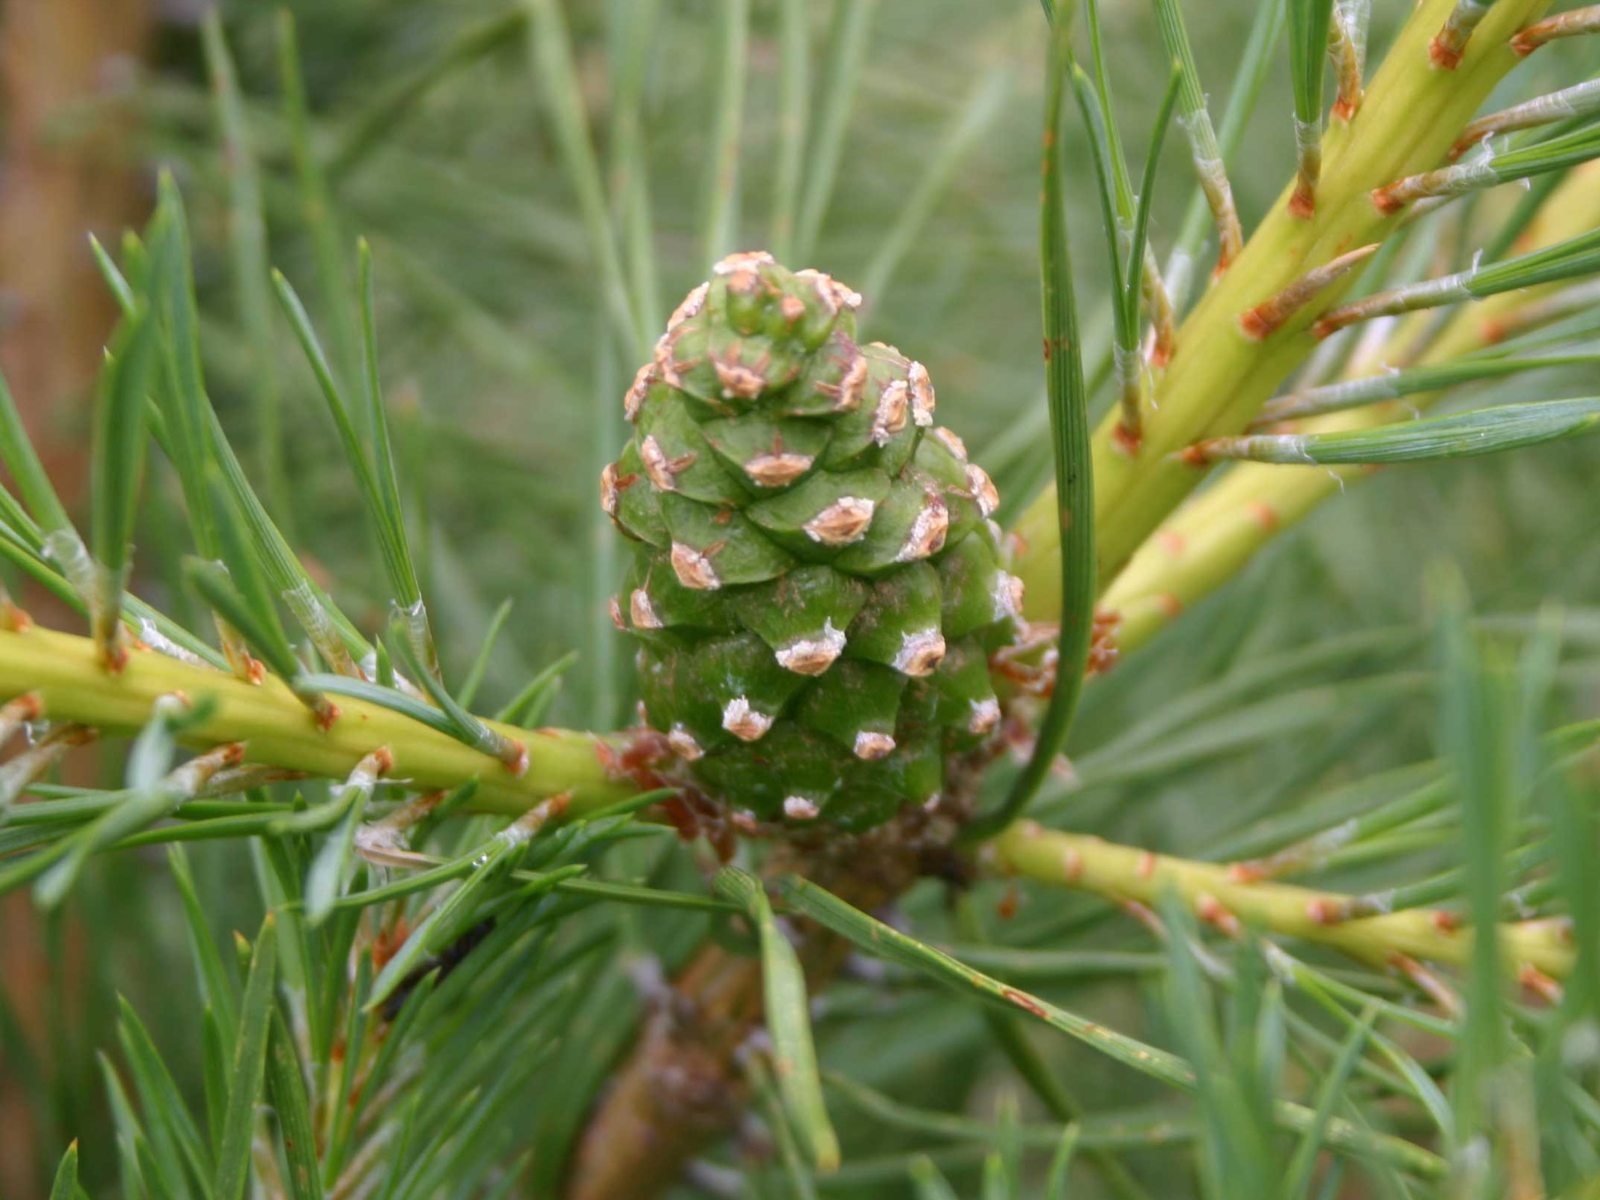 A green pine cone growing on a branch.